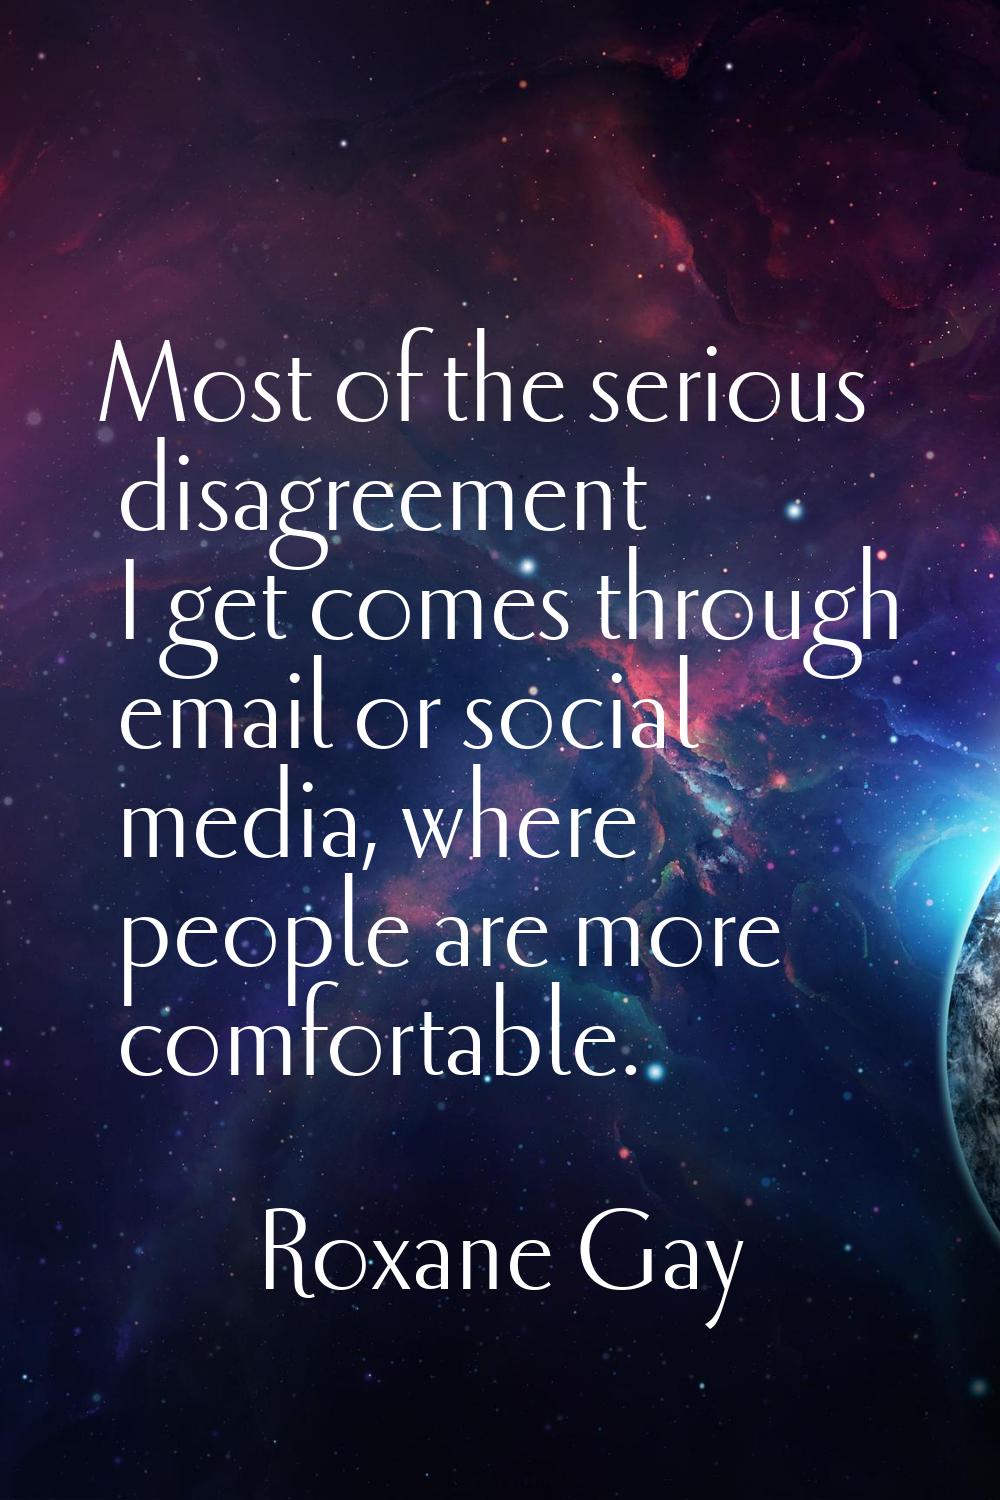 Most of the serious disagreement I get comes through email or social media, where people are more c